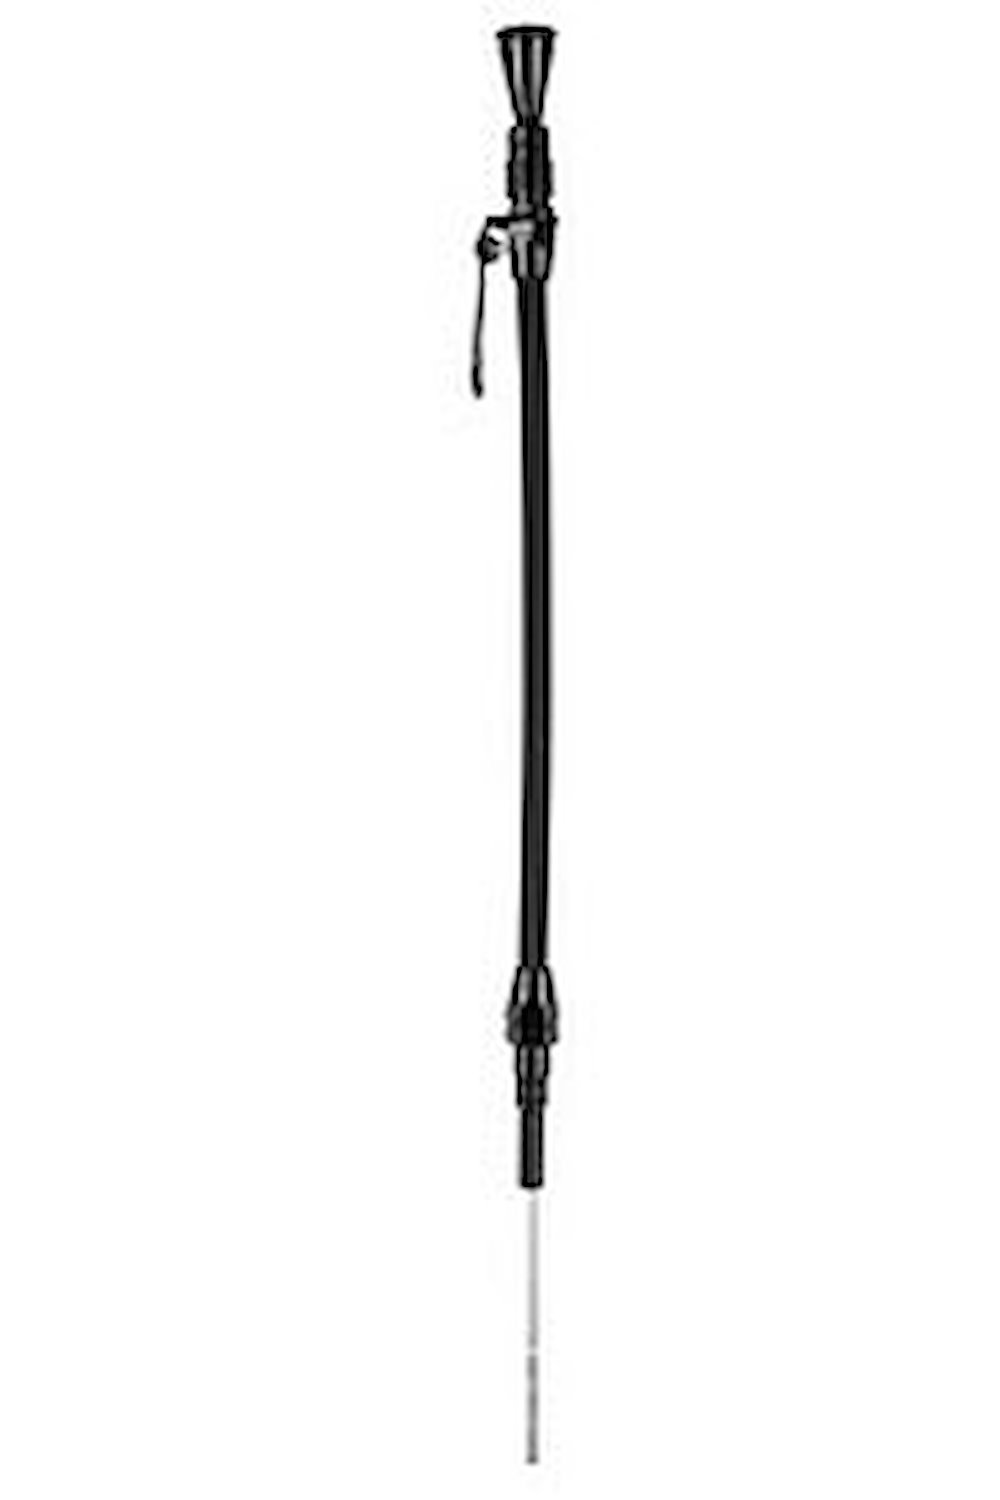 Anchor-Tight Locking Flexible Engine Dipstick Ford 351W